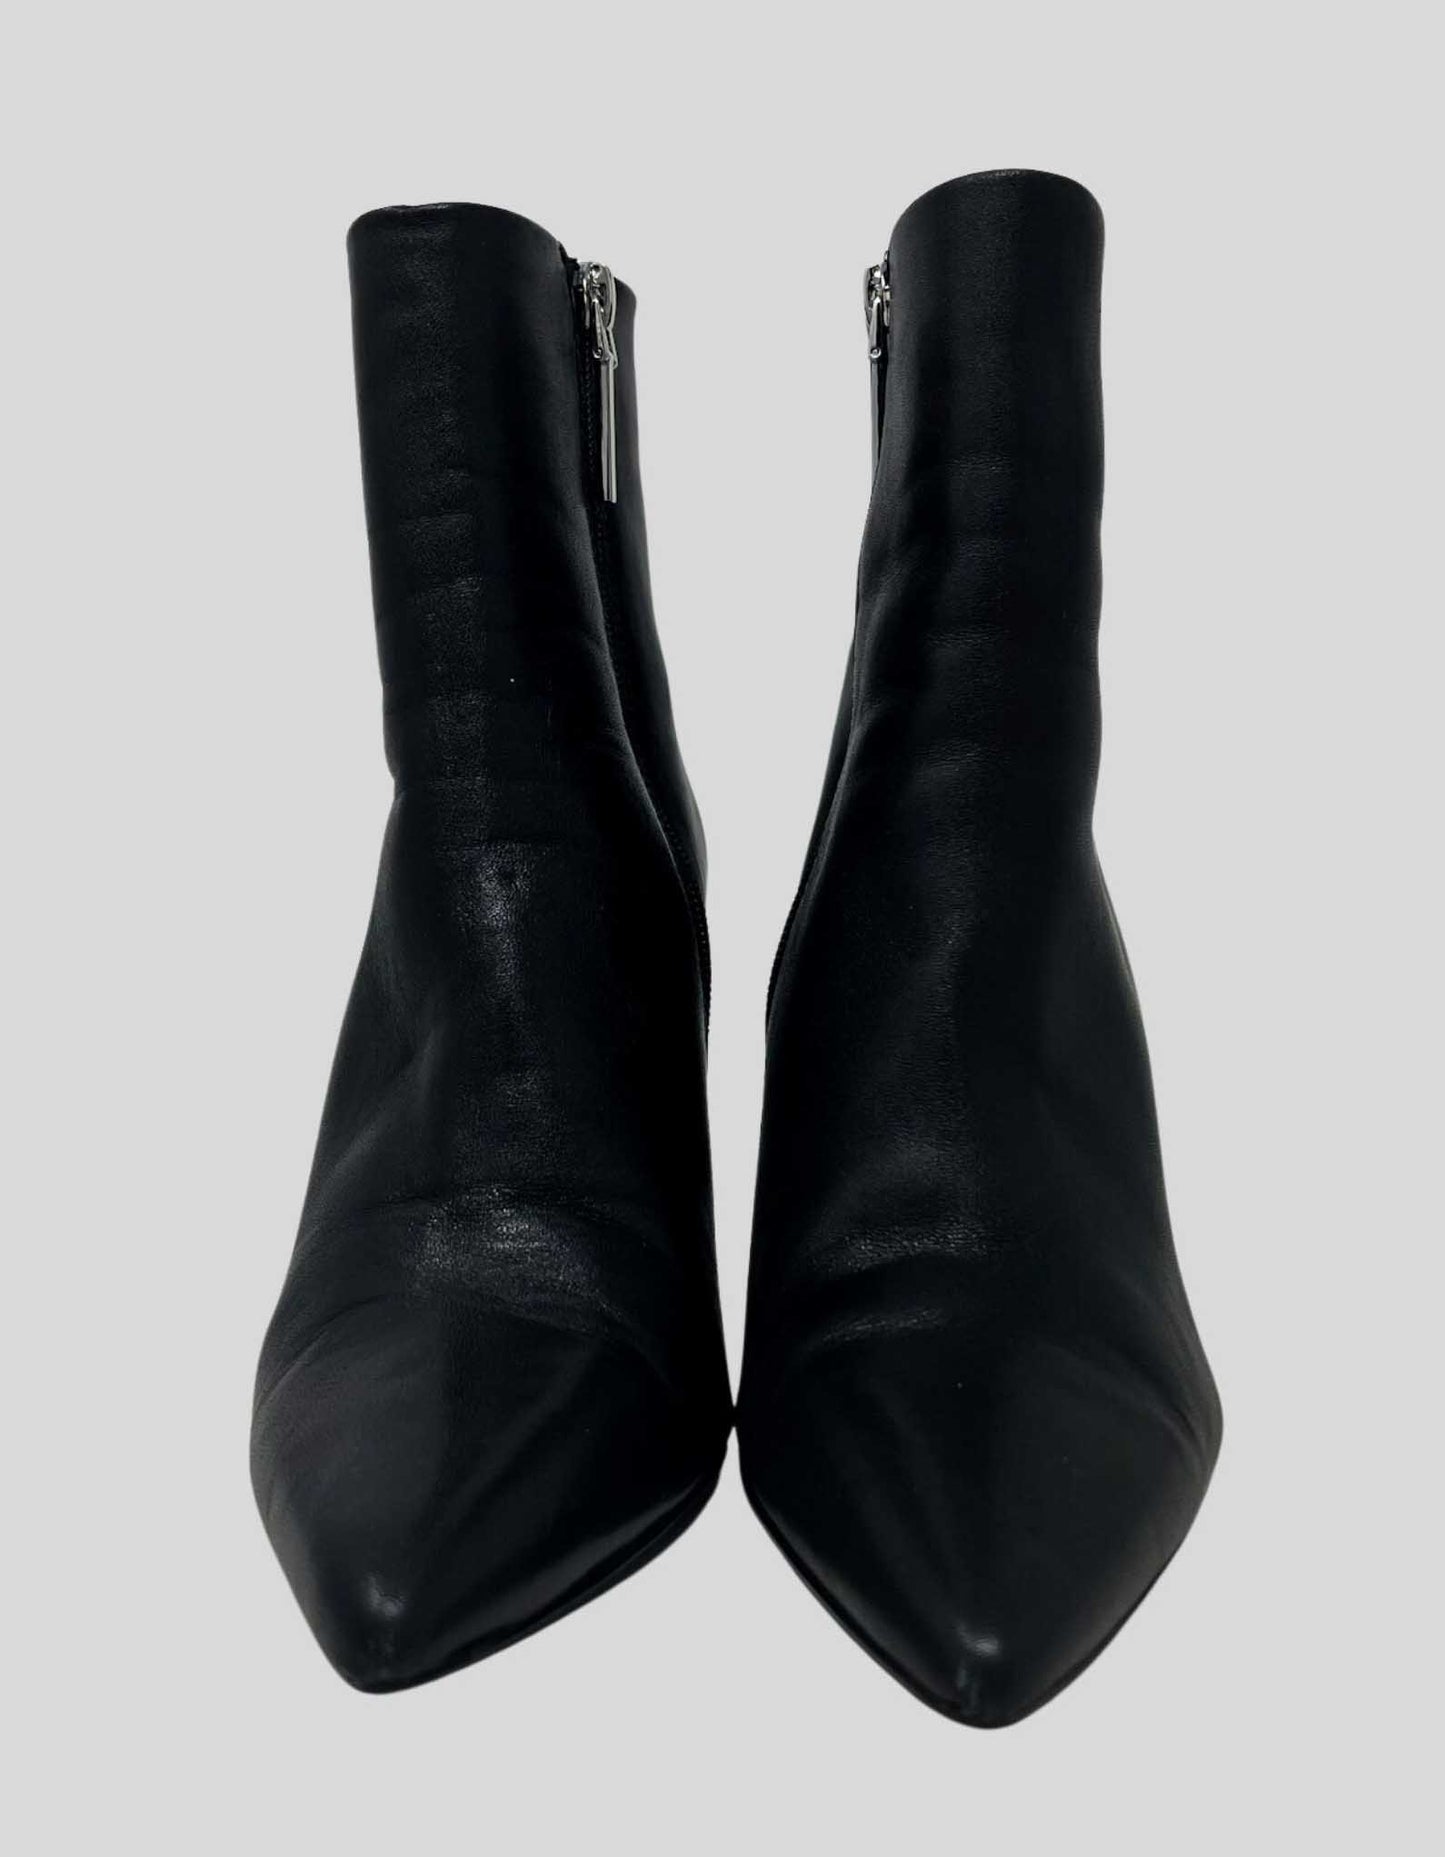 ZARA Leather Wedge Ankle Boots - 37 IT | 7 US